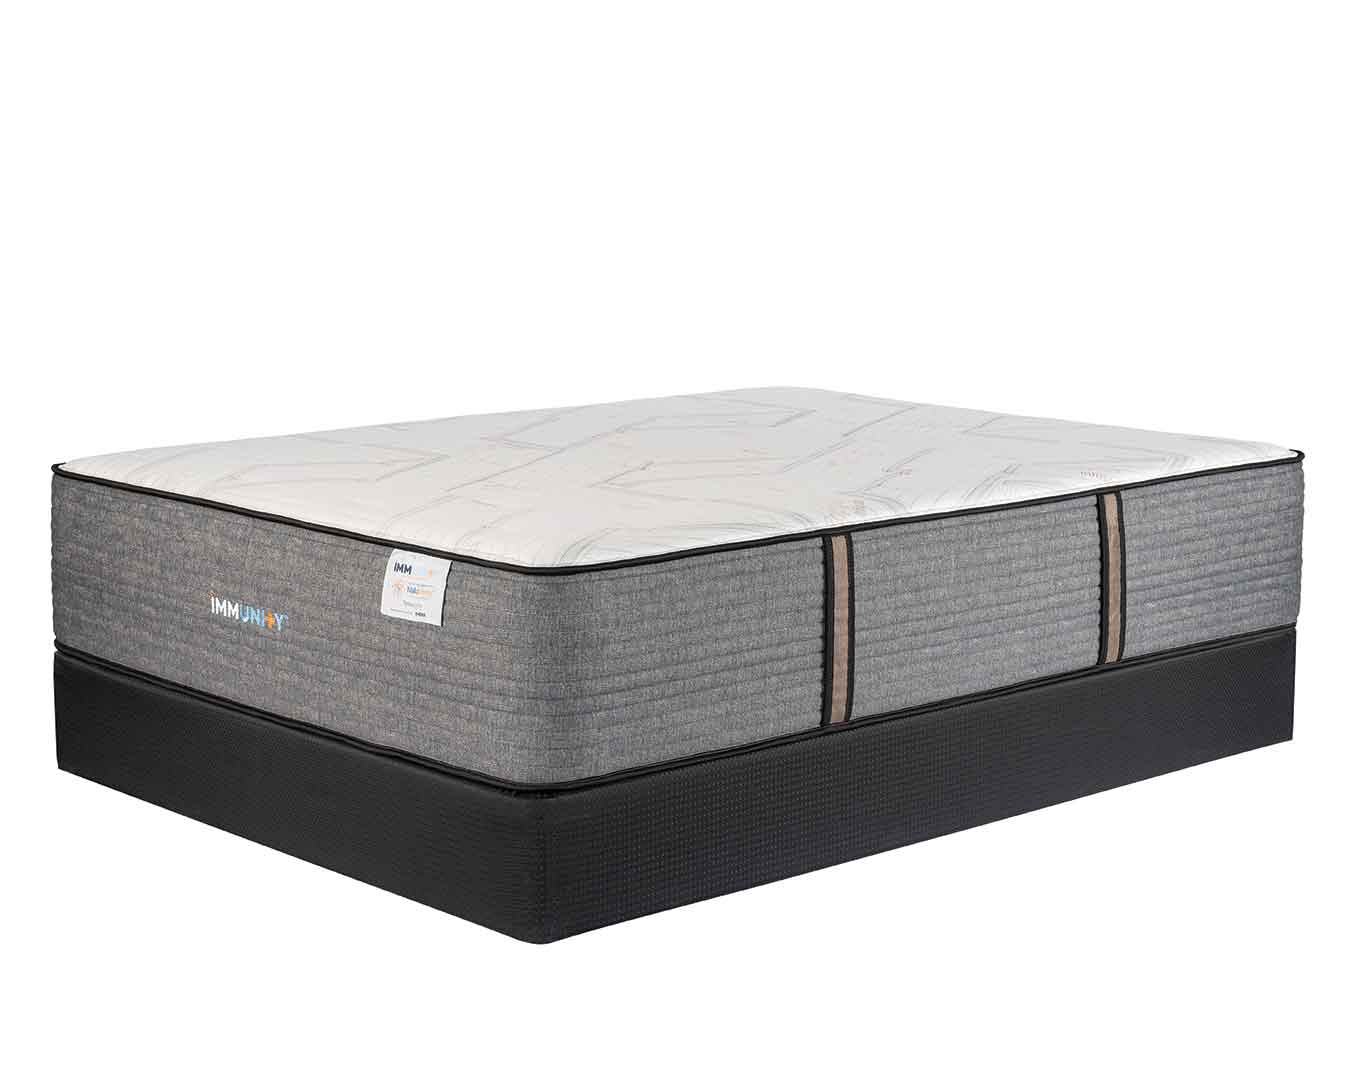 Immunity Terracotta copper mattress on agility foundation at an angle with a white background.